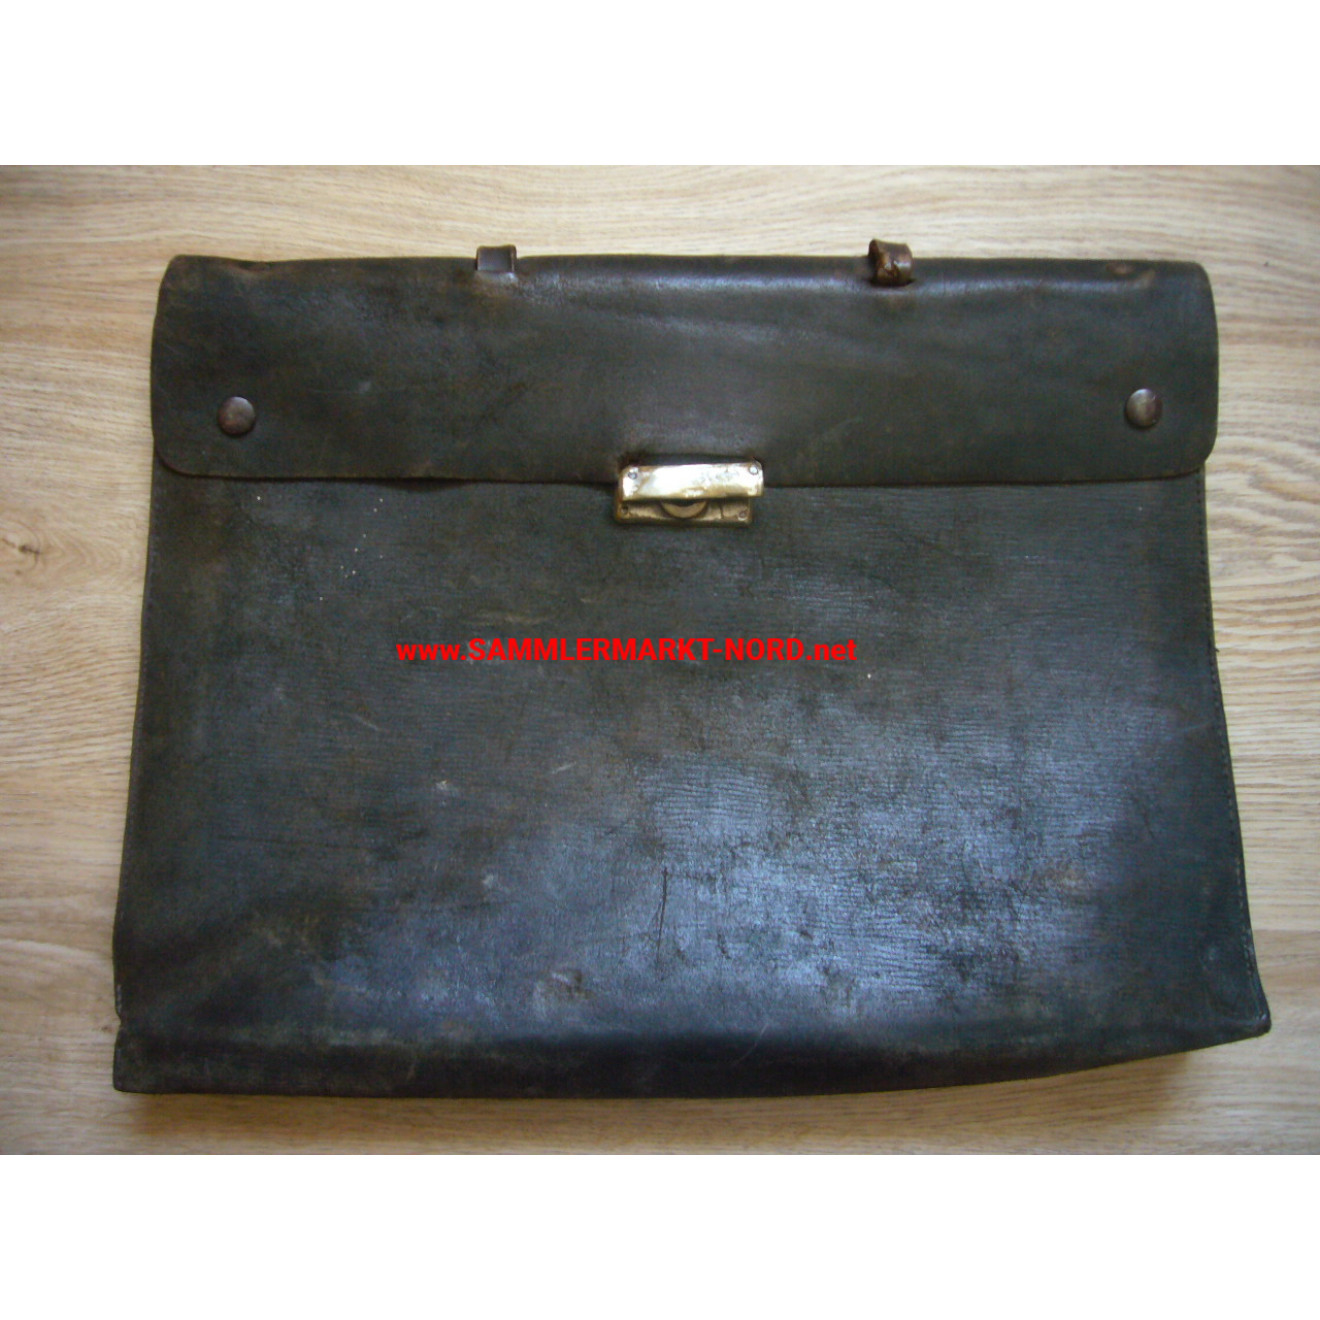 Luftwaffe - Leather briefcase for officers